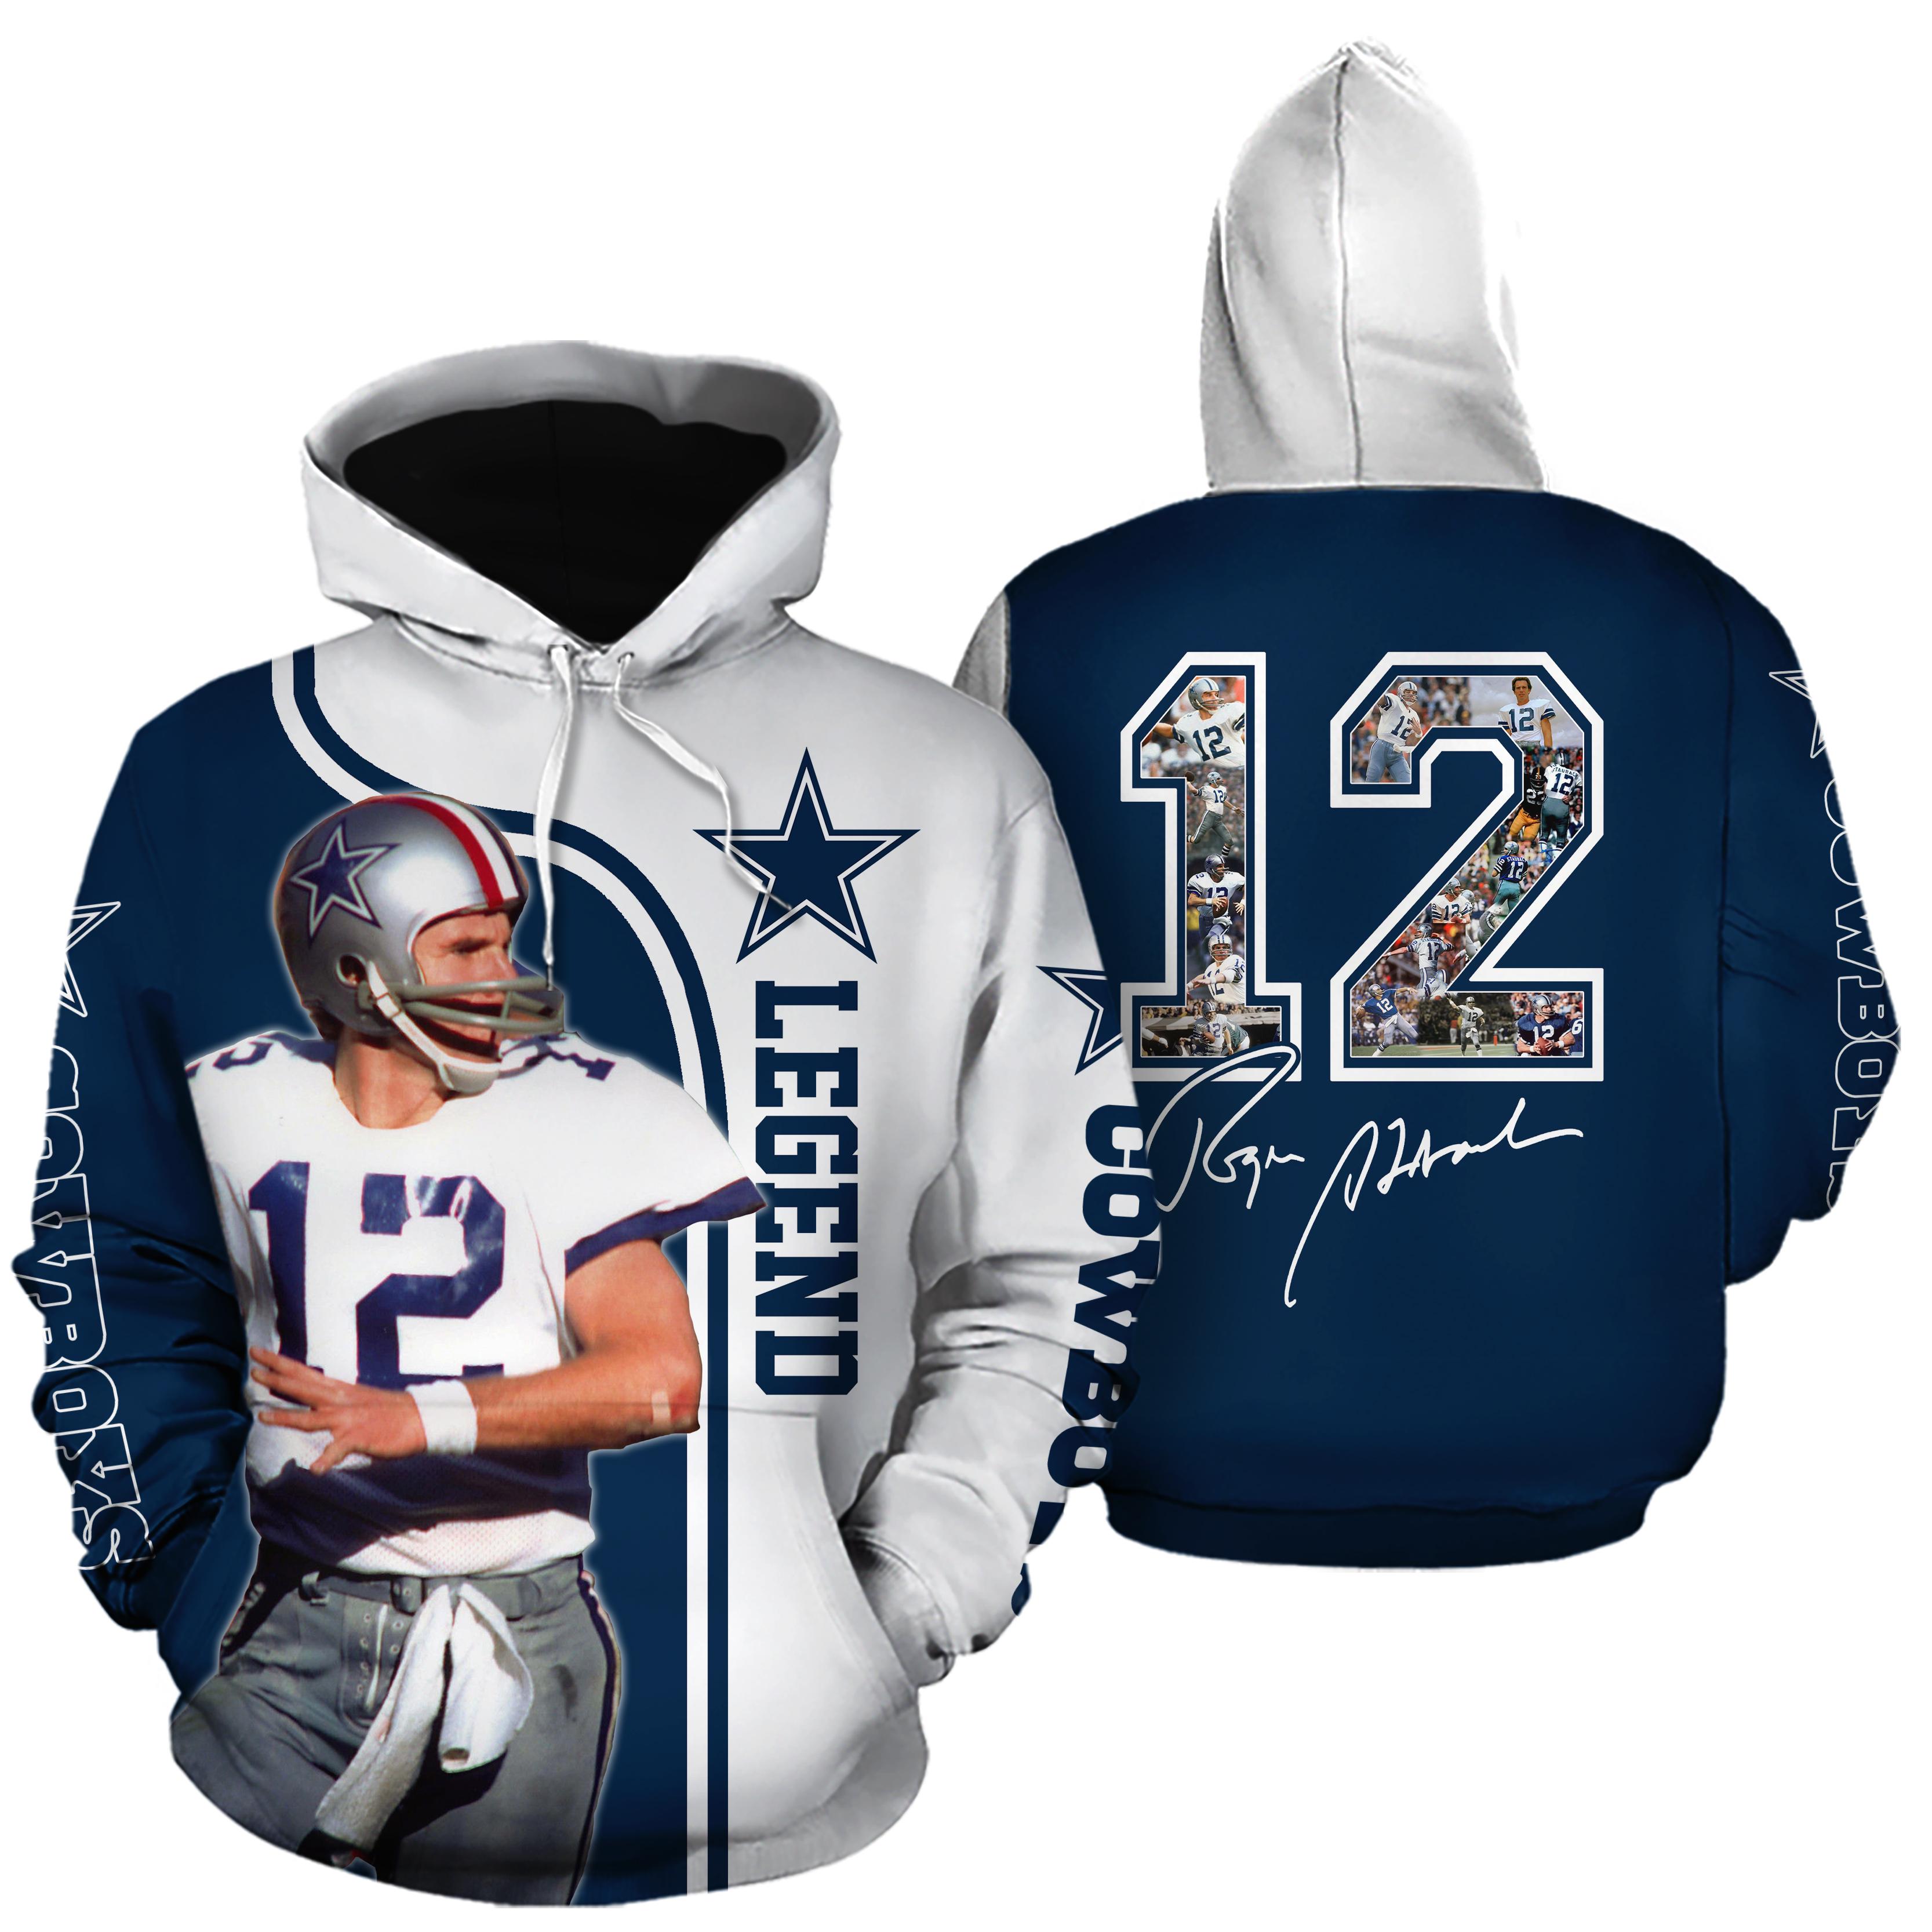 Stocktee Dallas Cowboys #12 Signature Limited Edition Men's And Women's ...